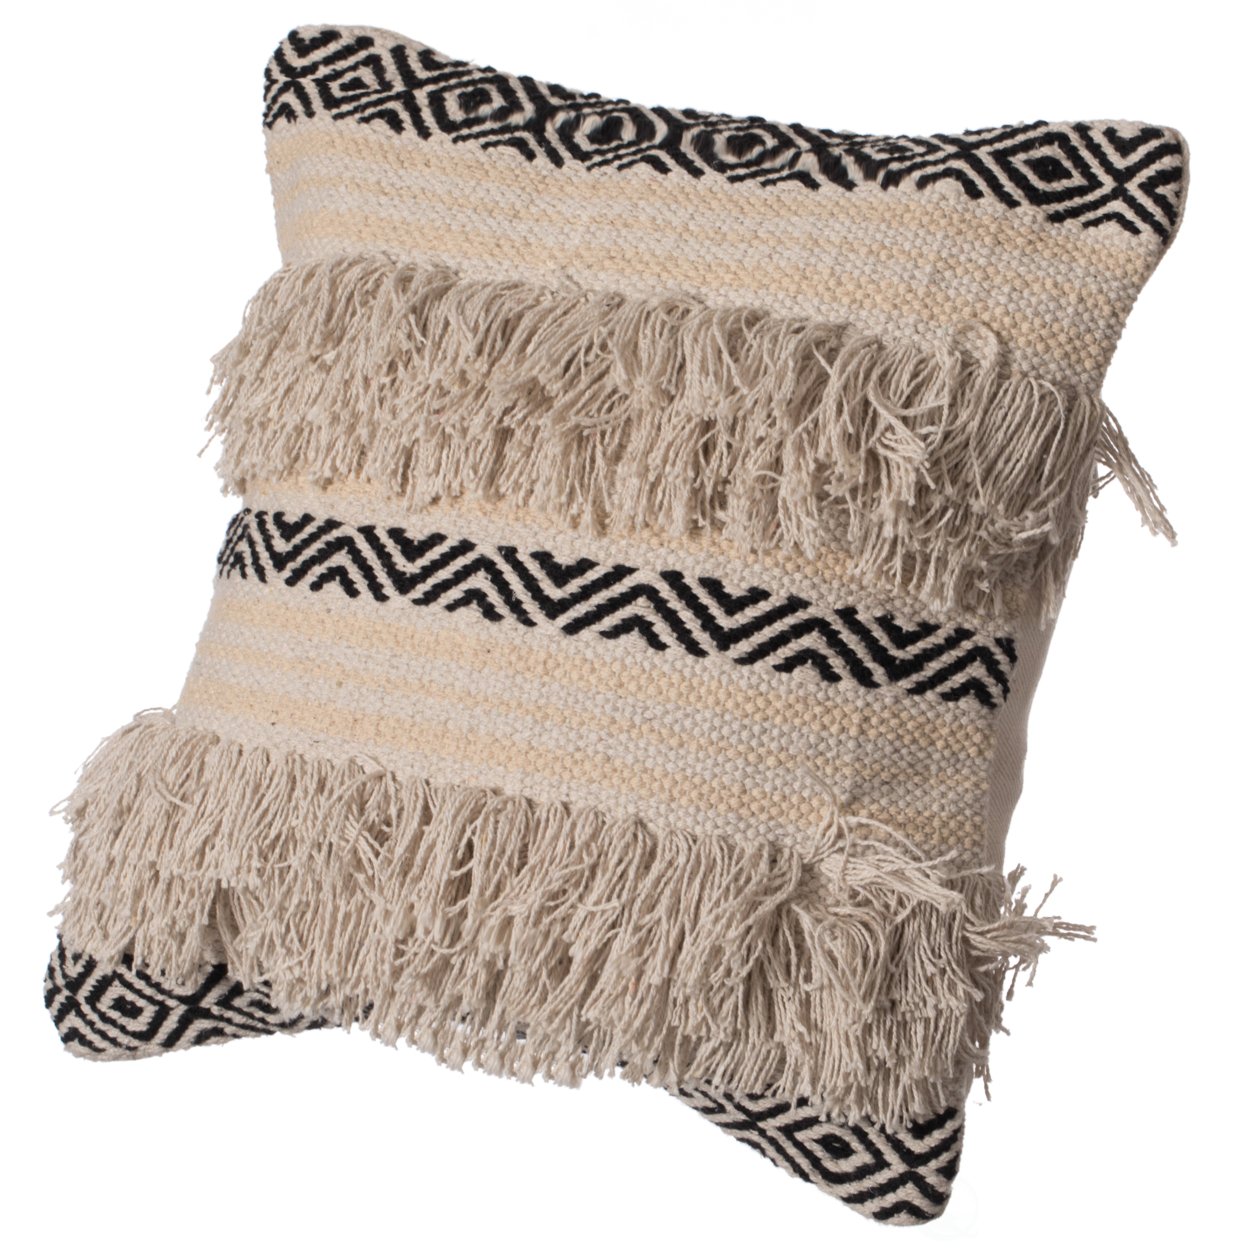 16" Handwoven Cotton Throw Pillow Cover with Boho Design and Fringed Lines - pillowcase with cushion